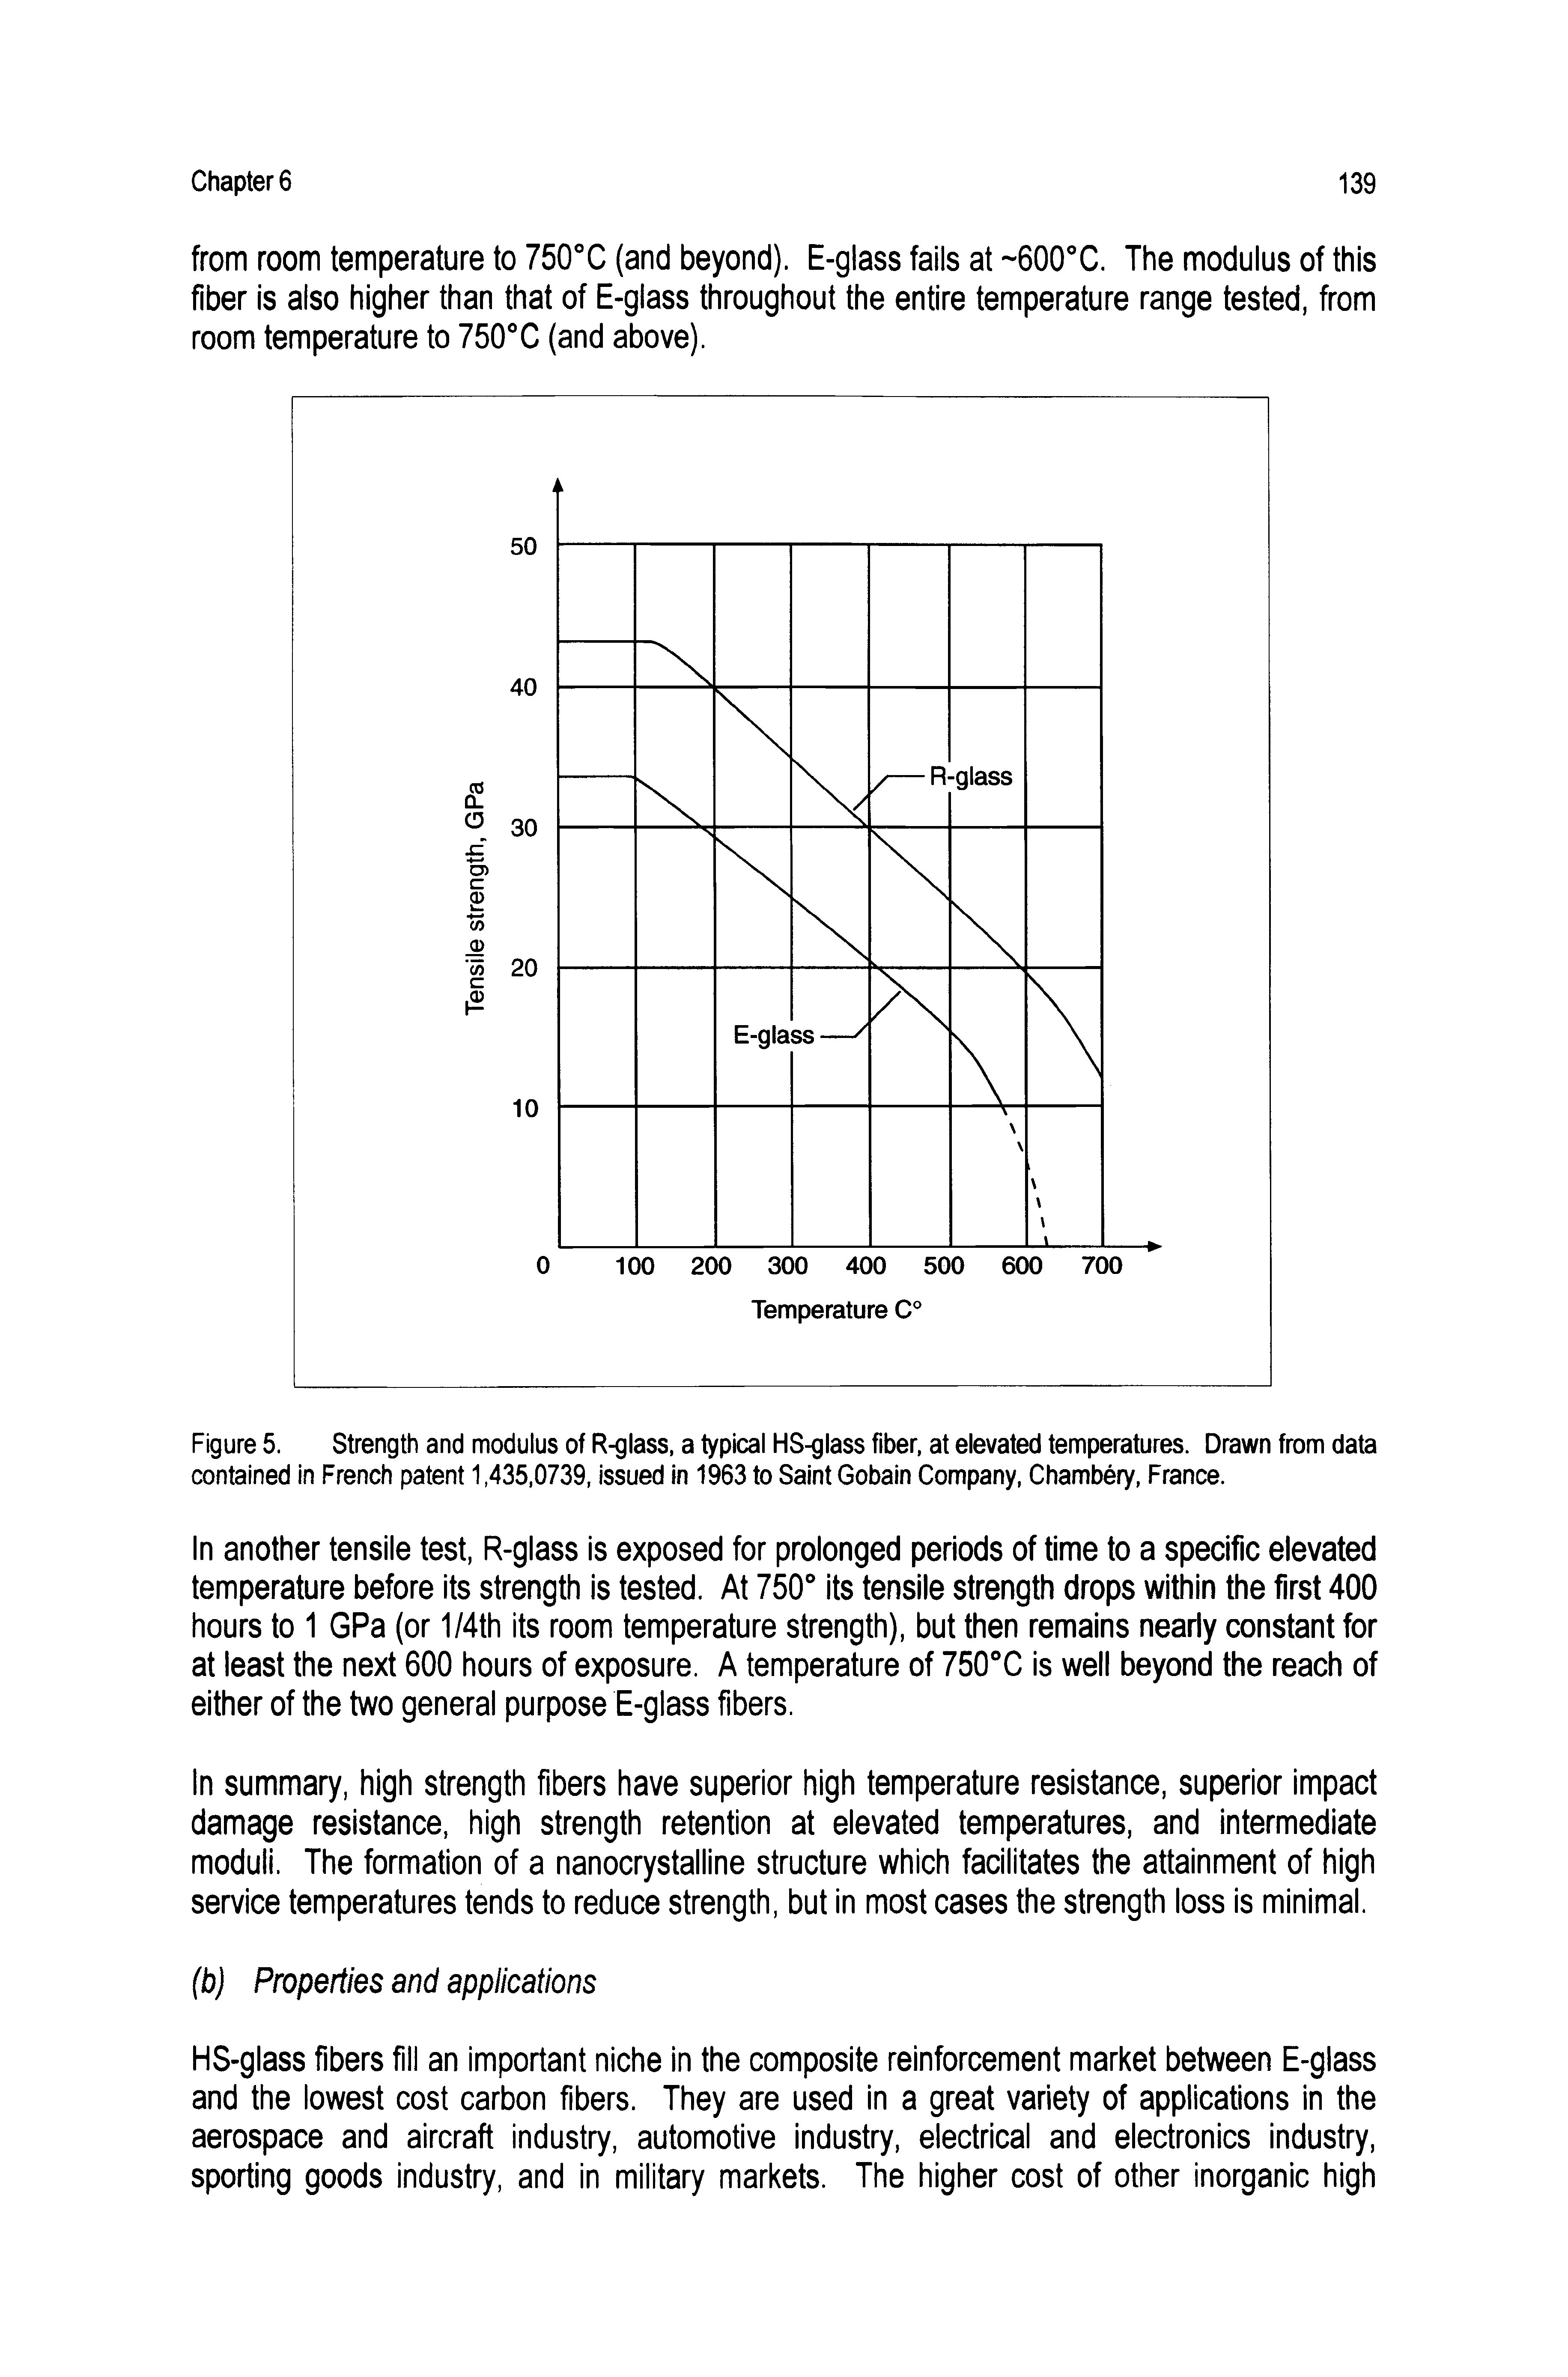 Figure 5. Strength and modulus of R-glass, a typical HS-gla fiber, at elevated temperatures. Drawn from data contained in French patent 1,435.0739, issued in 1963 to Saint Gobain Company, Chambery, France.